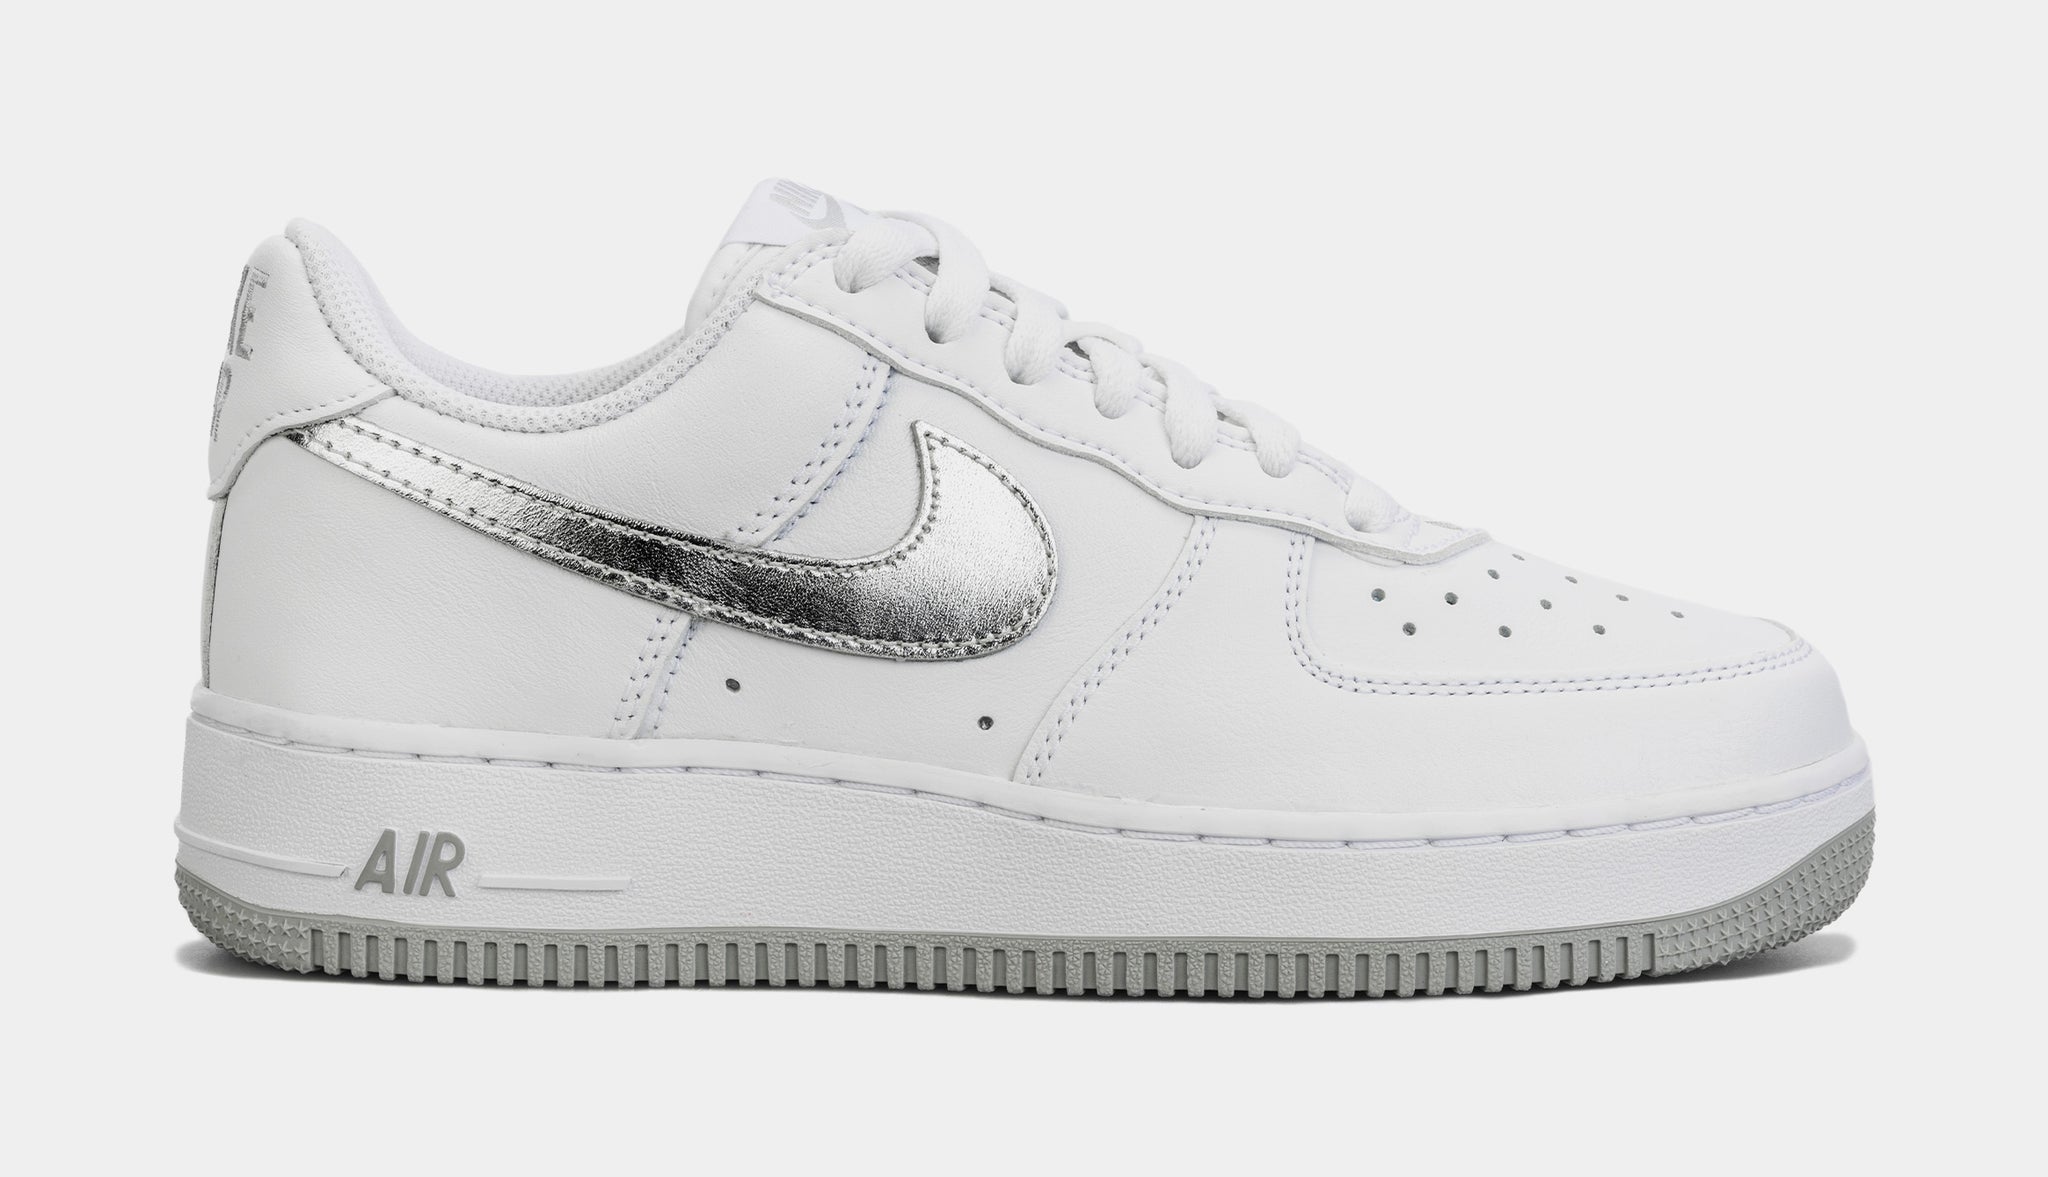 Air Force 1 Low Retro Mens Basketball Shoes (White/Grey)